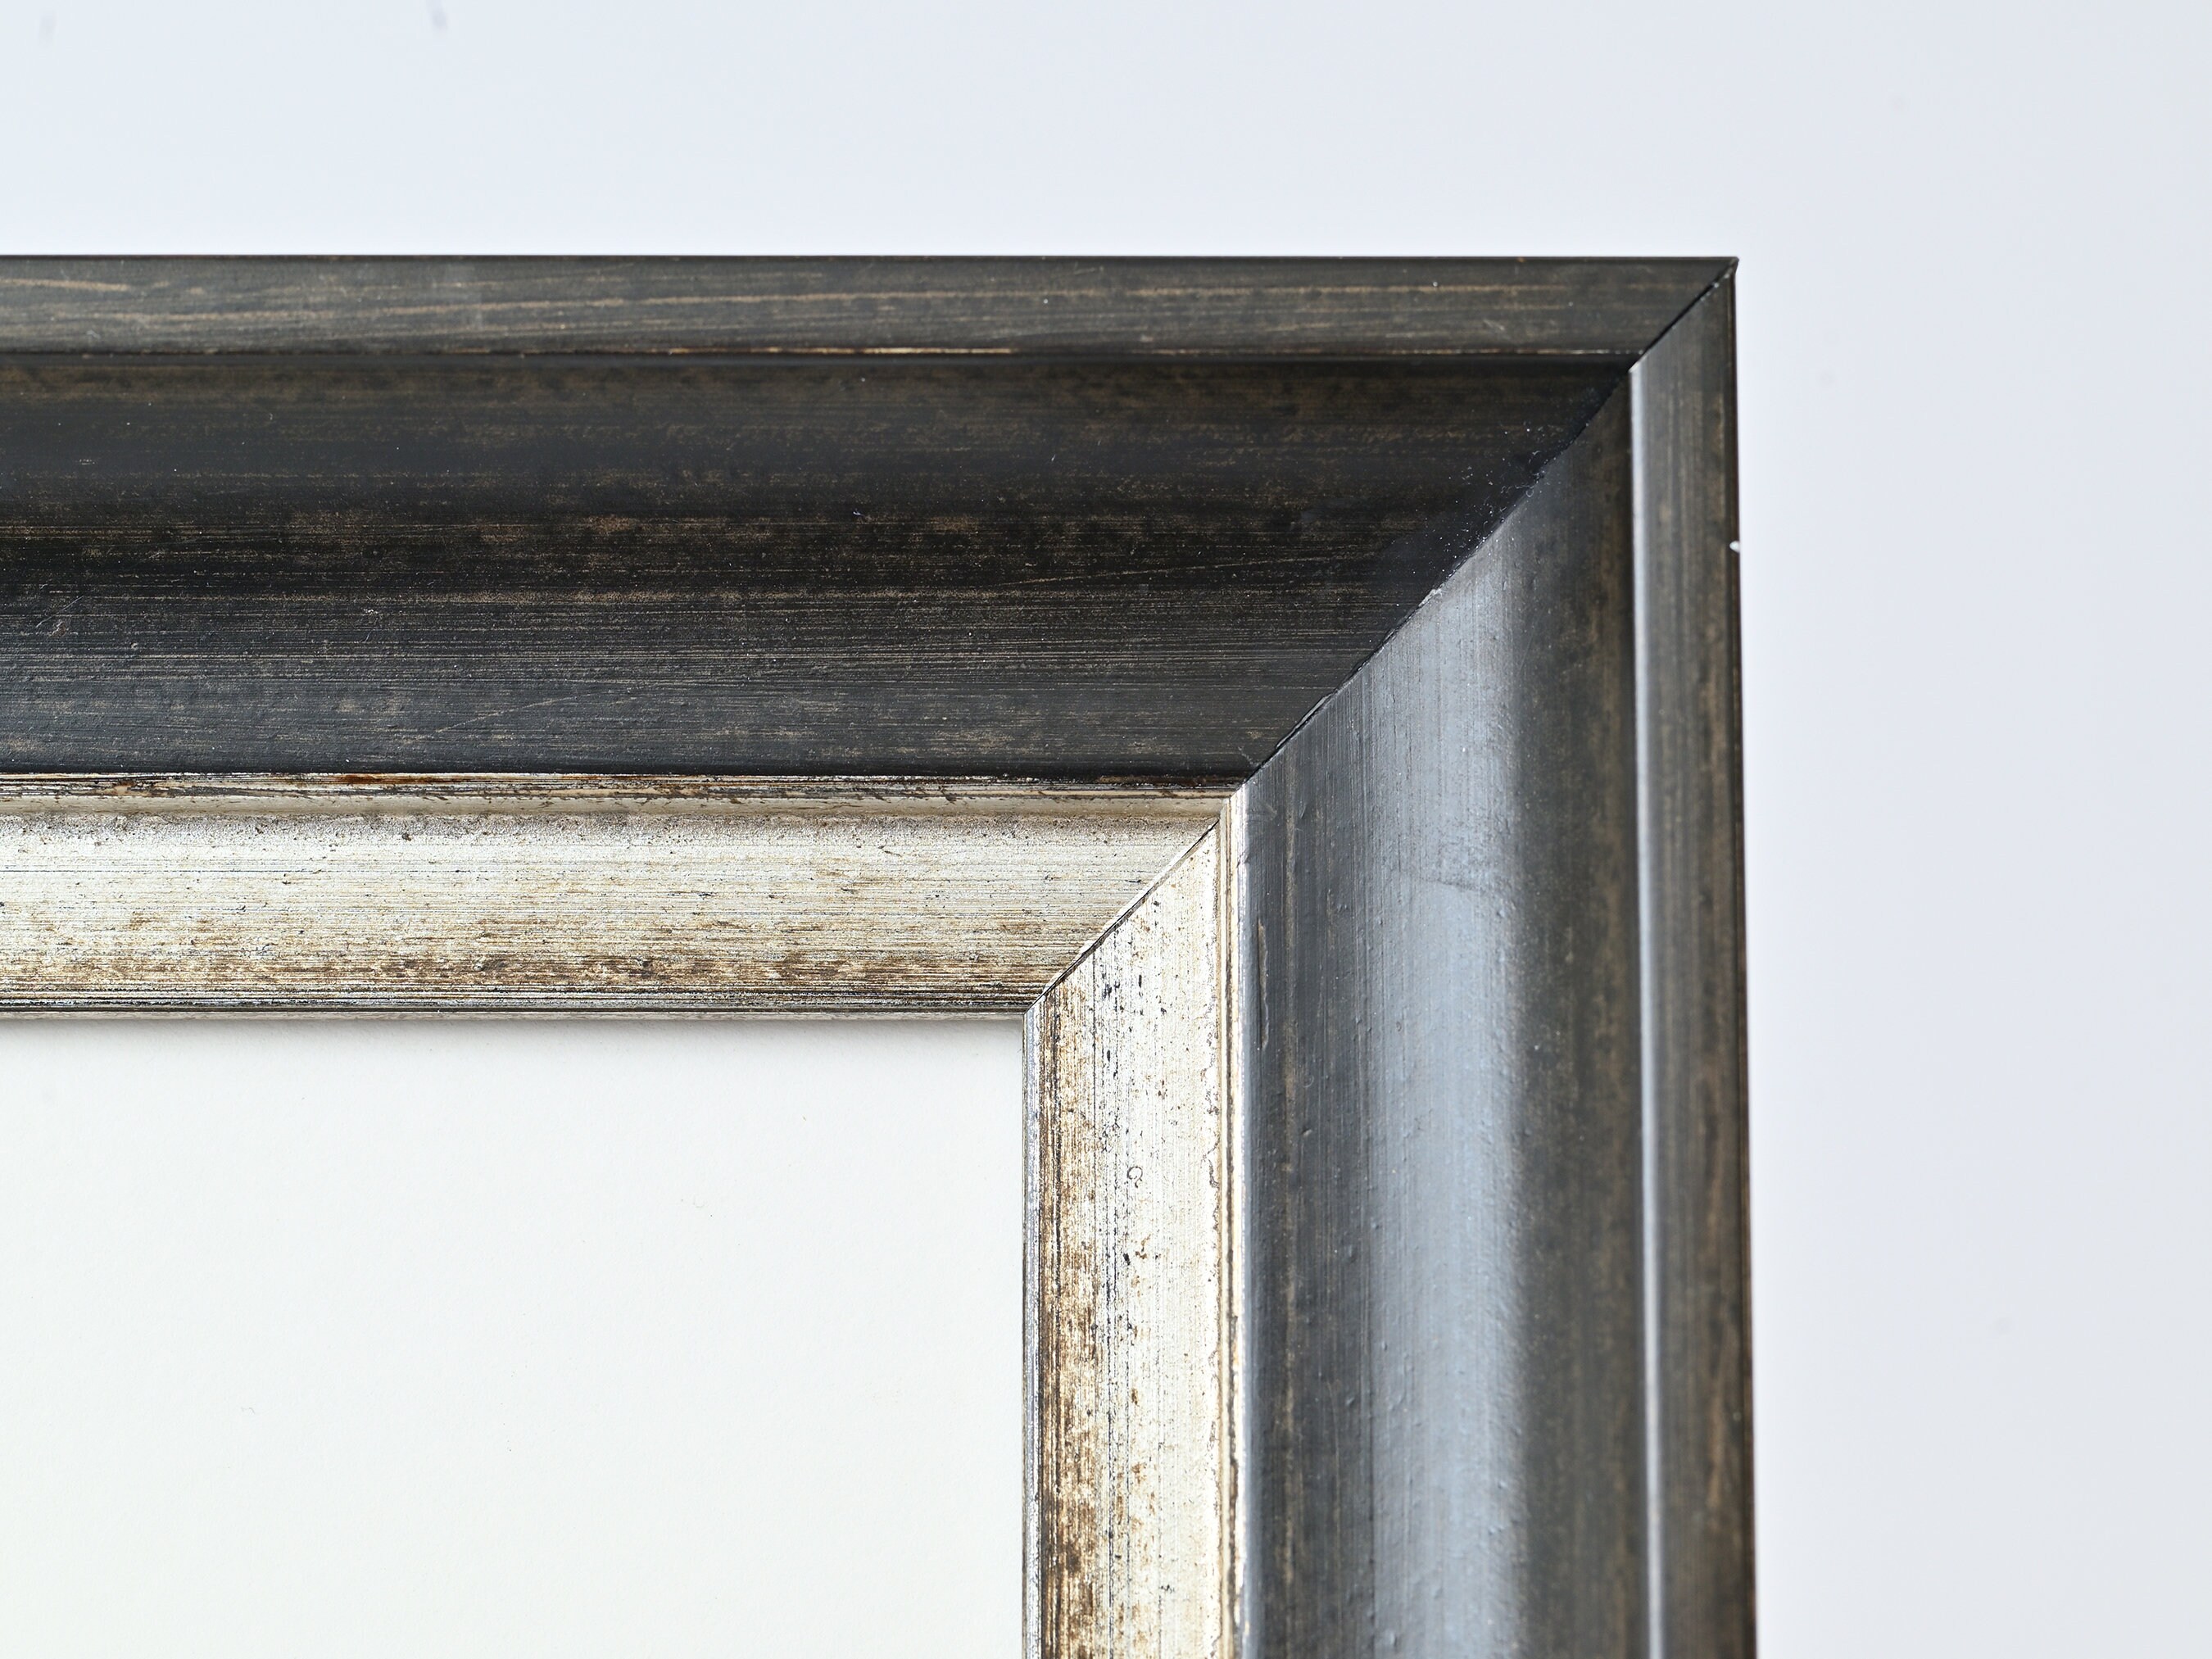 The Sterling Frame 30X30 Silver with Champagne Wash - World of Decor